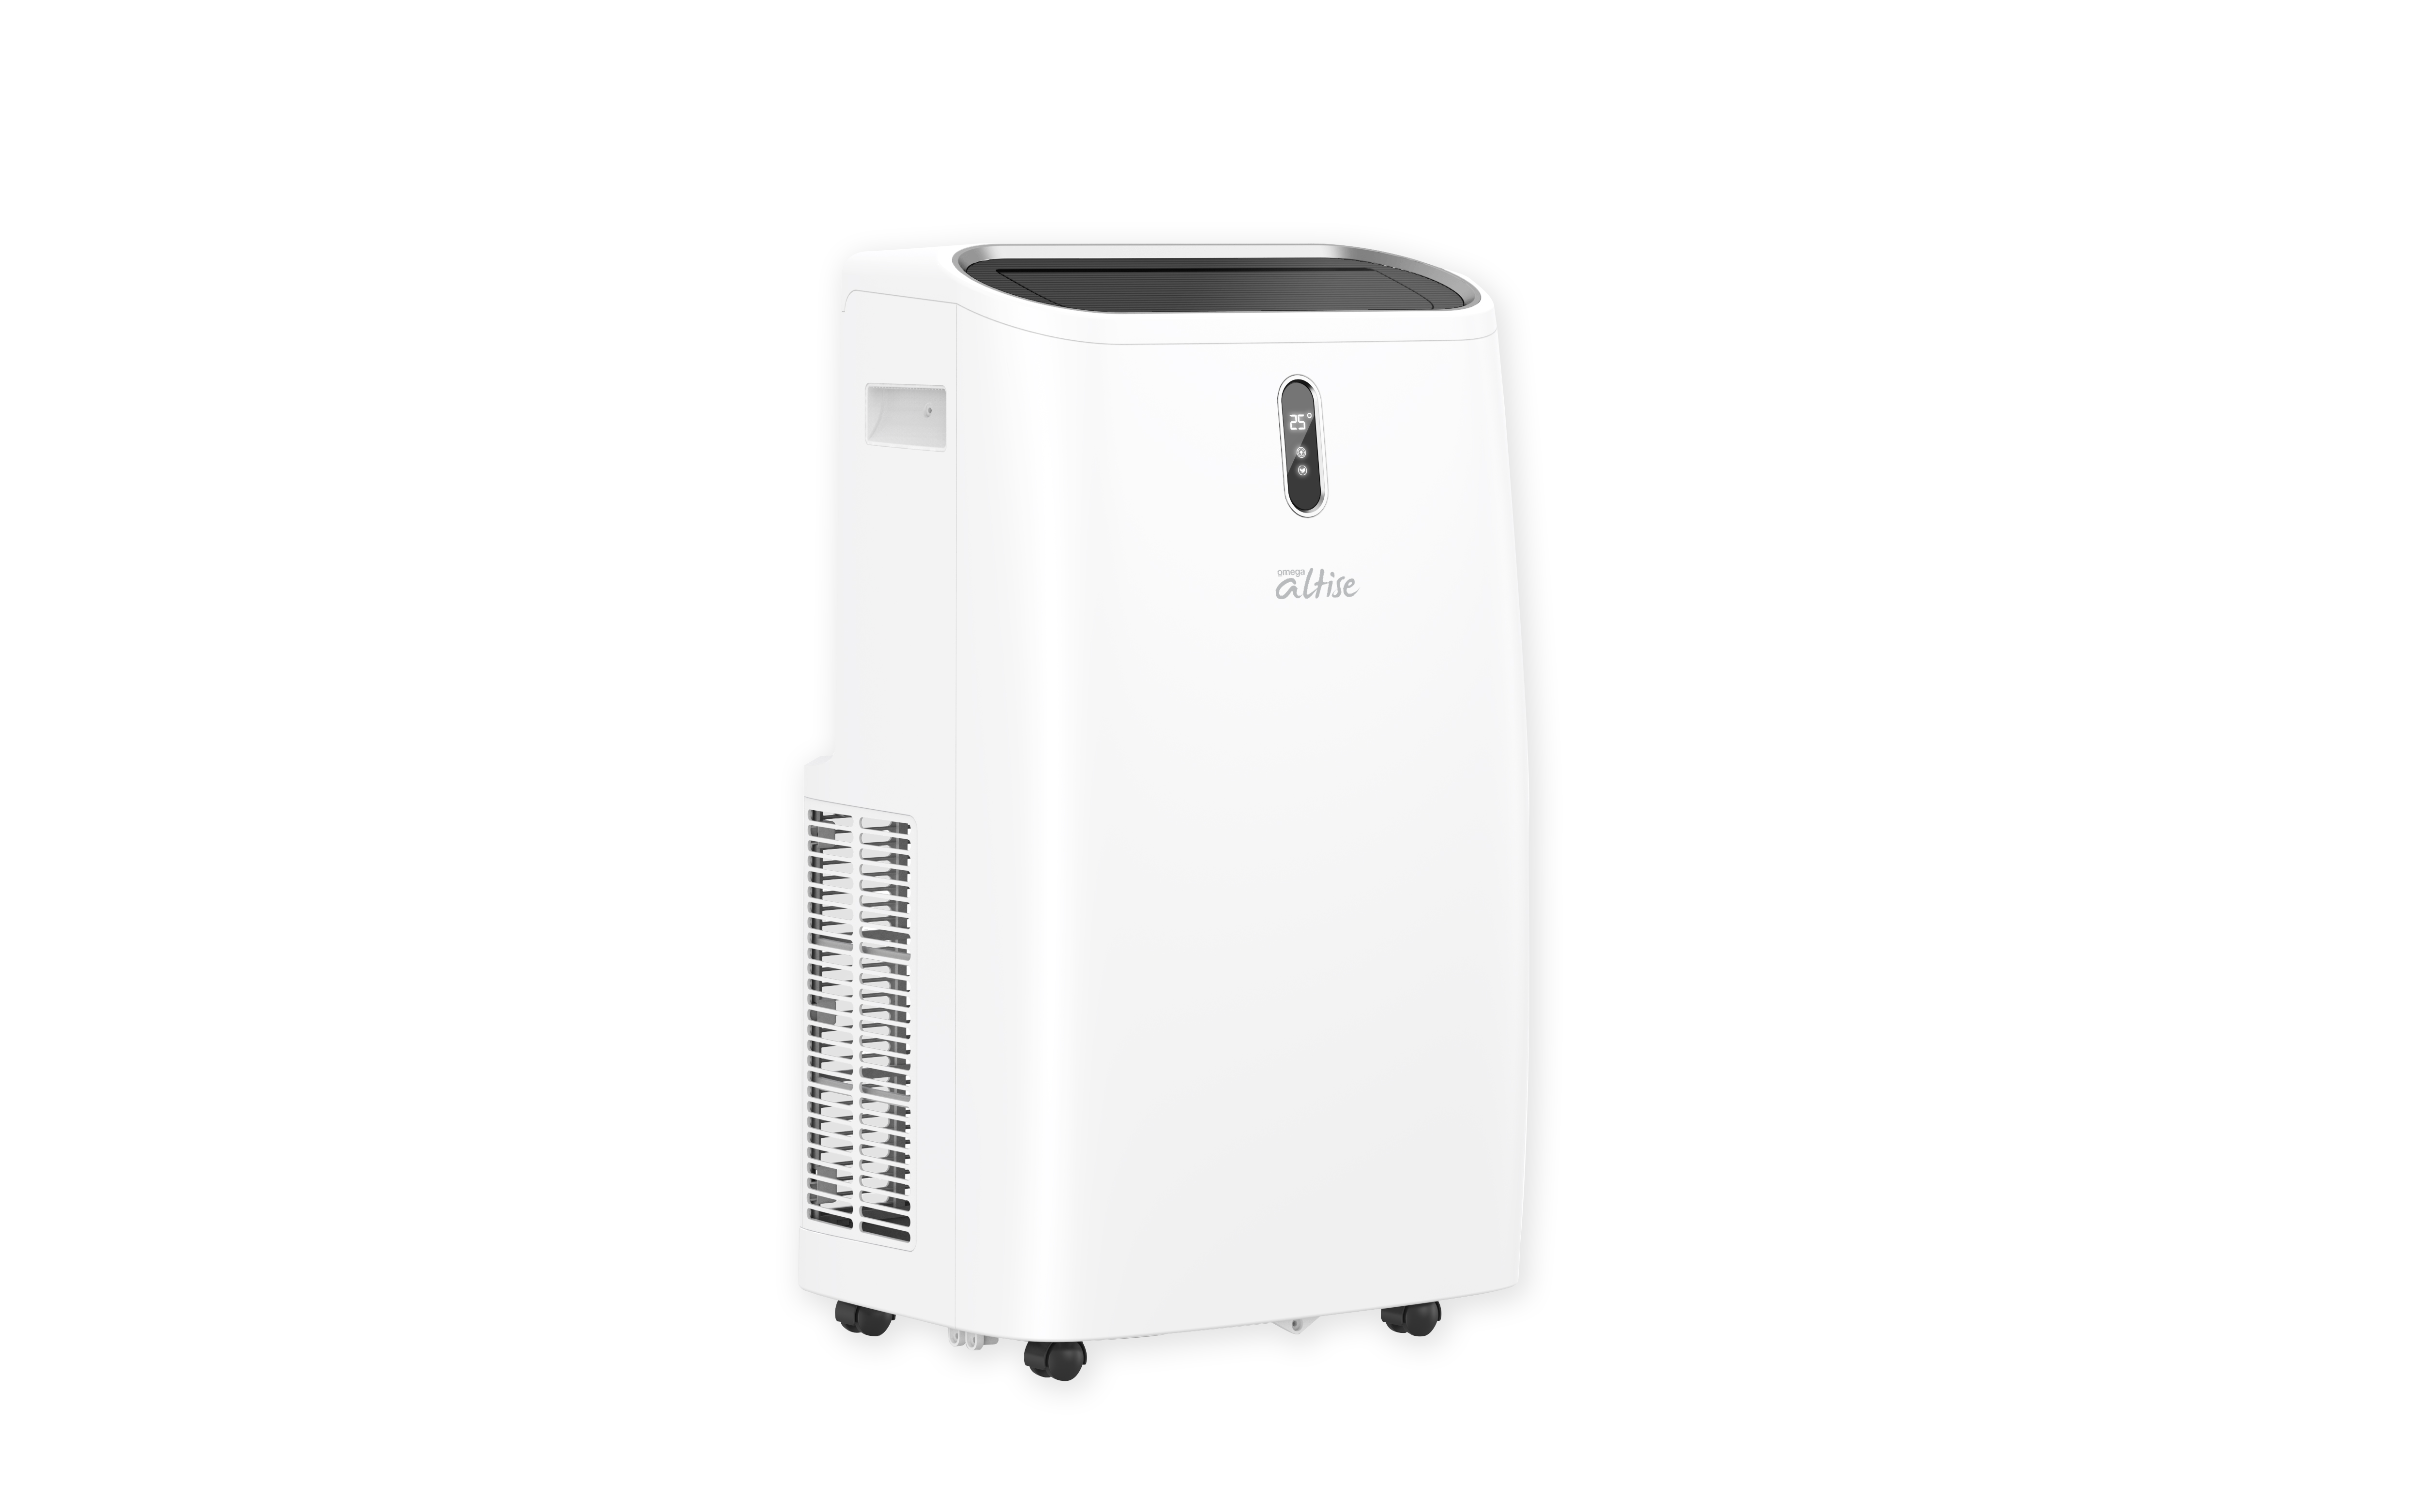 Omega Altise product (3.52kW) Portable Air Conditioner OAPC12W